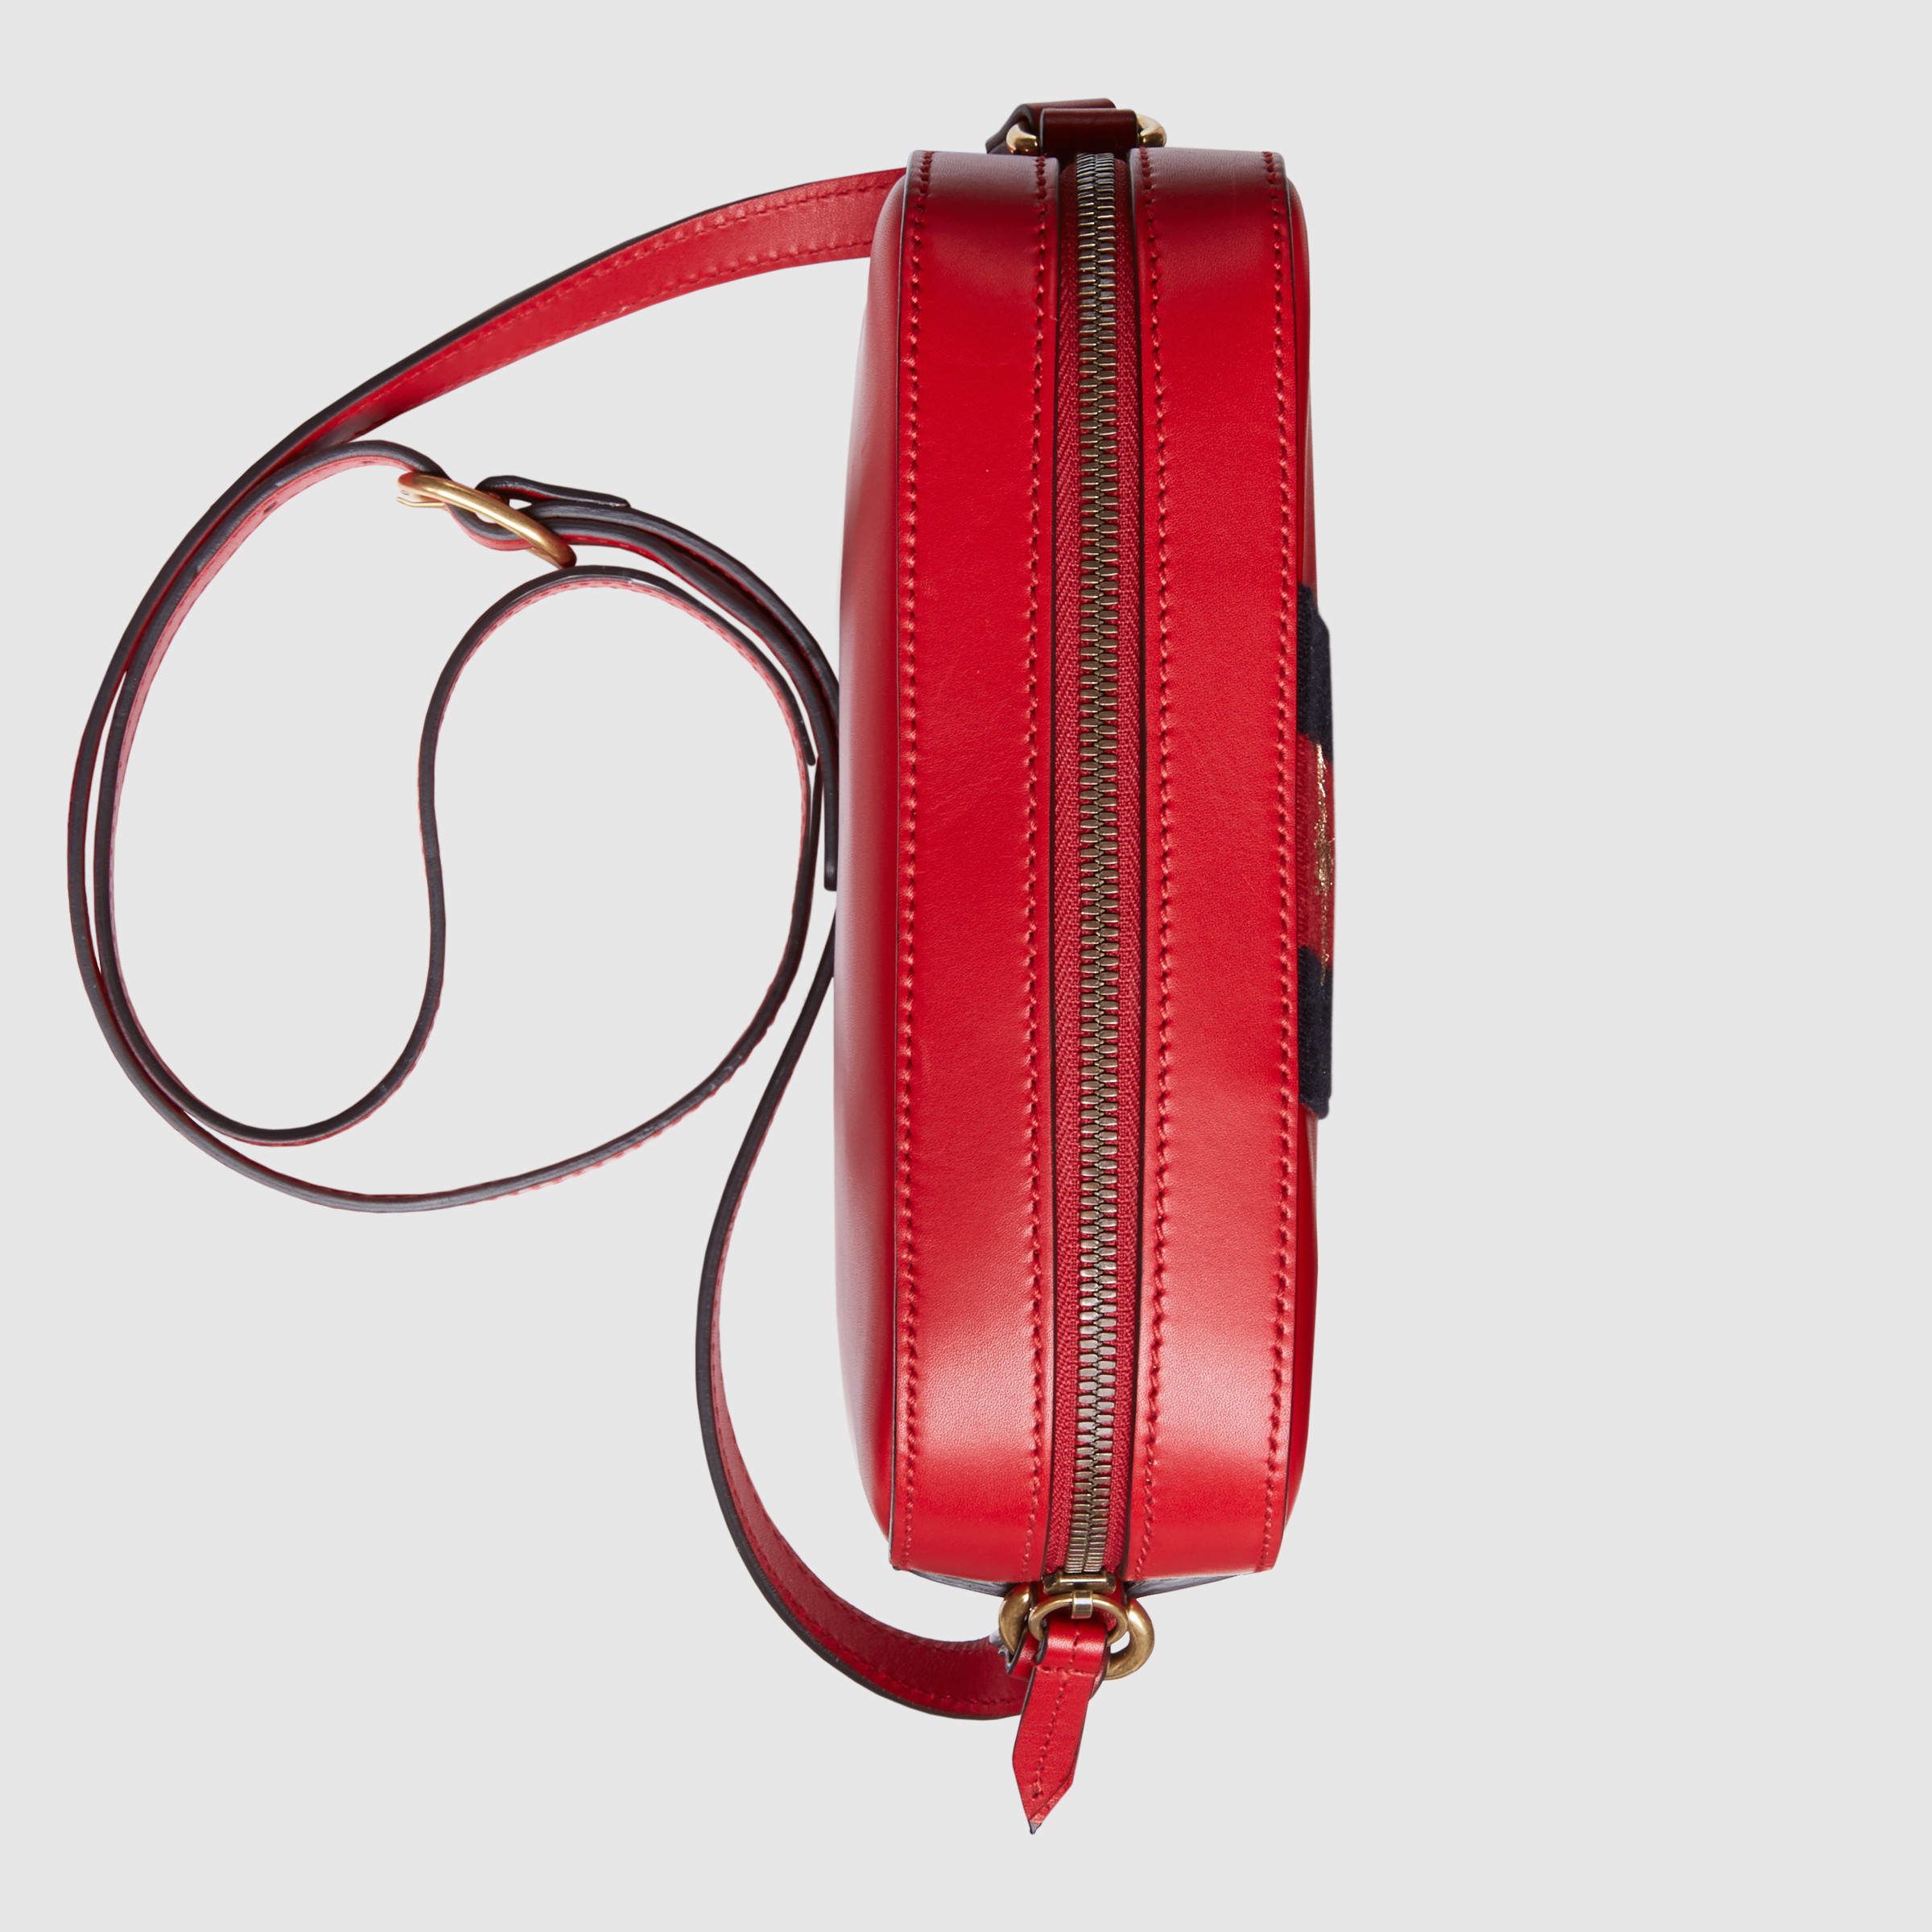 Gucci Bee Web Leather Shoulder Bag in Red - Lyst